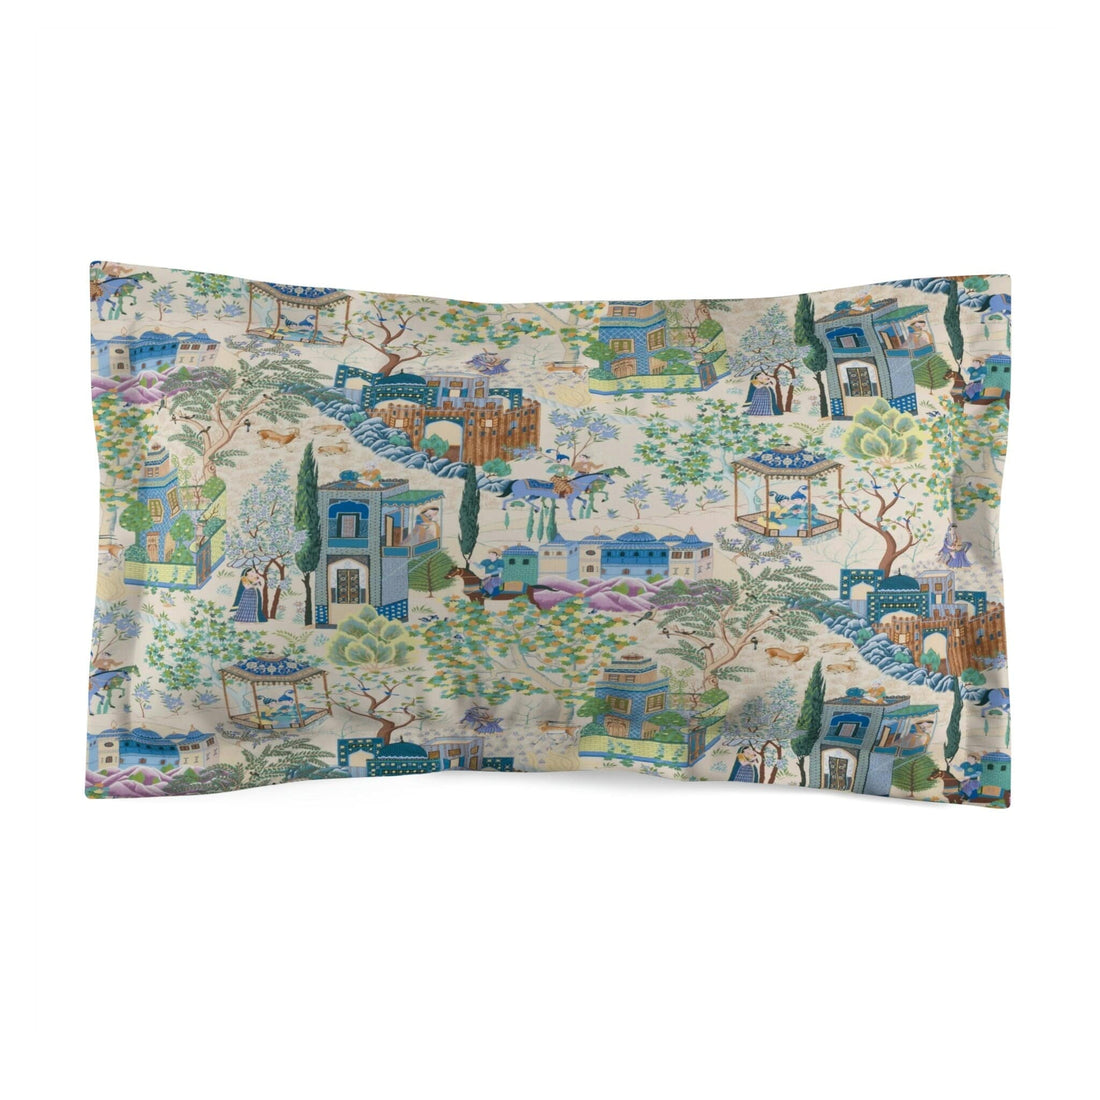 Kate McEnroe New York Vintage Toile De Jouy Pillow Sham, Blue and Green Floral Print Pillow Cover, Traditional Asian Country Scene with Horses, Rustic Chic Decor Pillow Shams